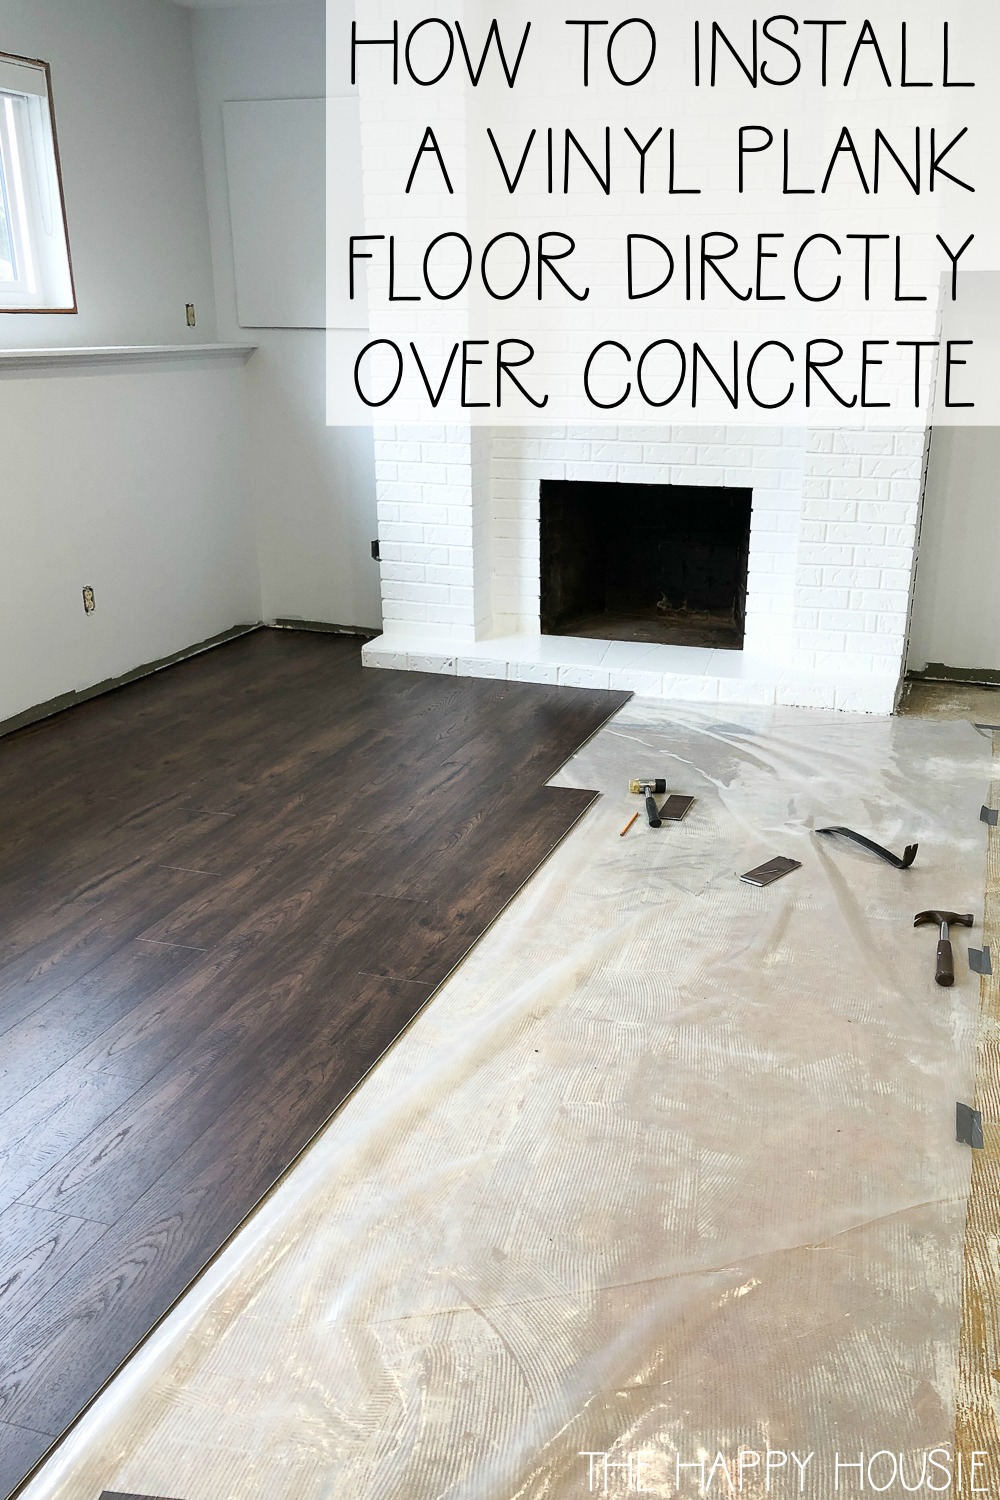 To Install Vinyl Plank Over Concrete, Do You Need Underlay For Vinyl Plank Flooring On Concrete